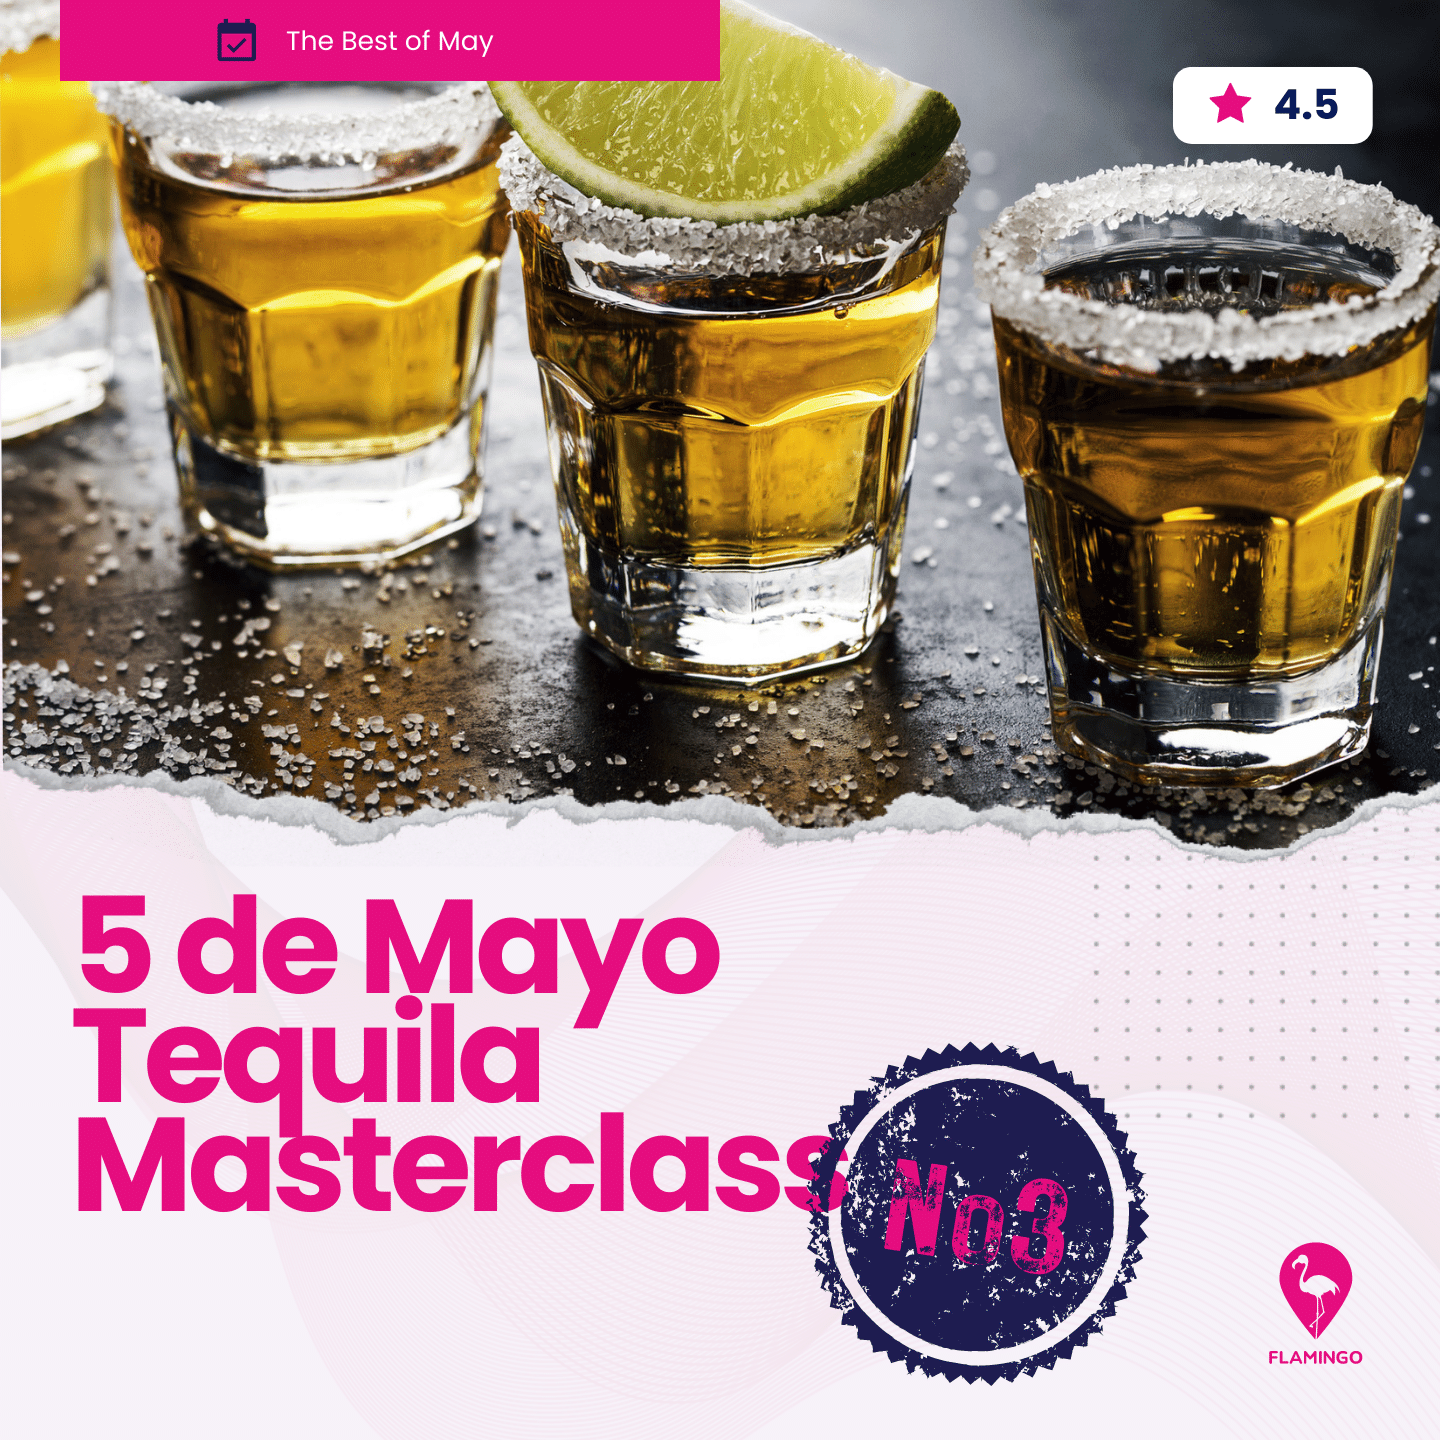 5 De Mayo Tequila Masterclass | Resident Event Ideas for May